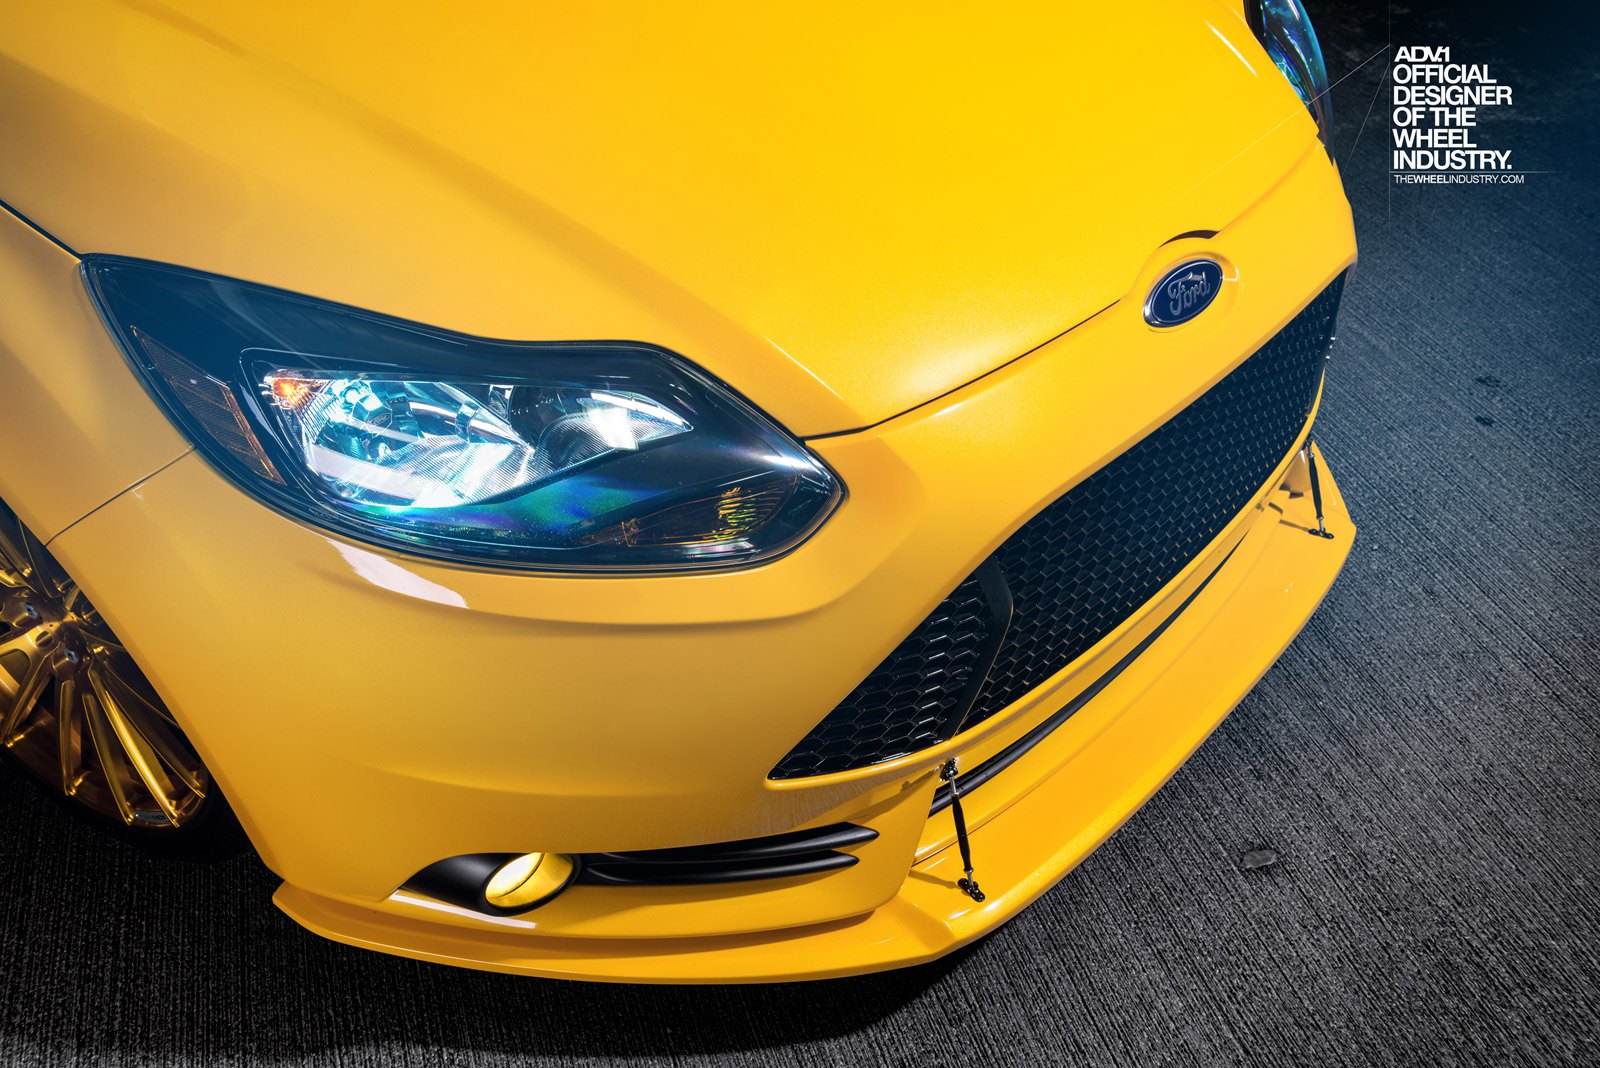 Yellow Matte Ford Fiesta with Projector Headlights - Photo by ADV.1